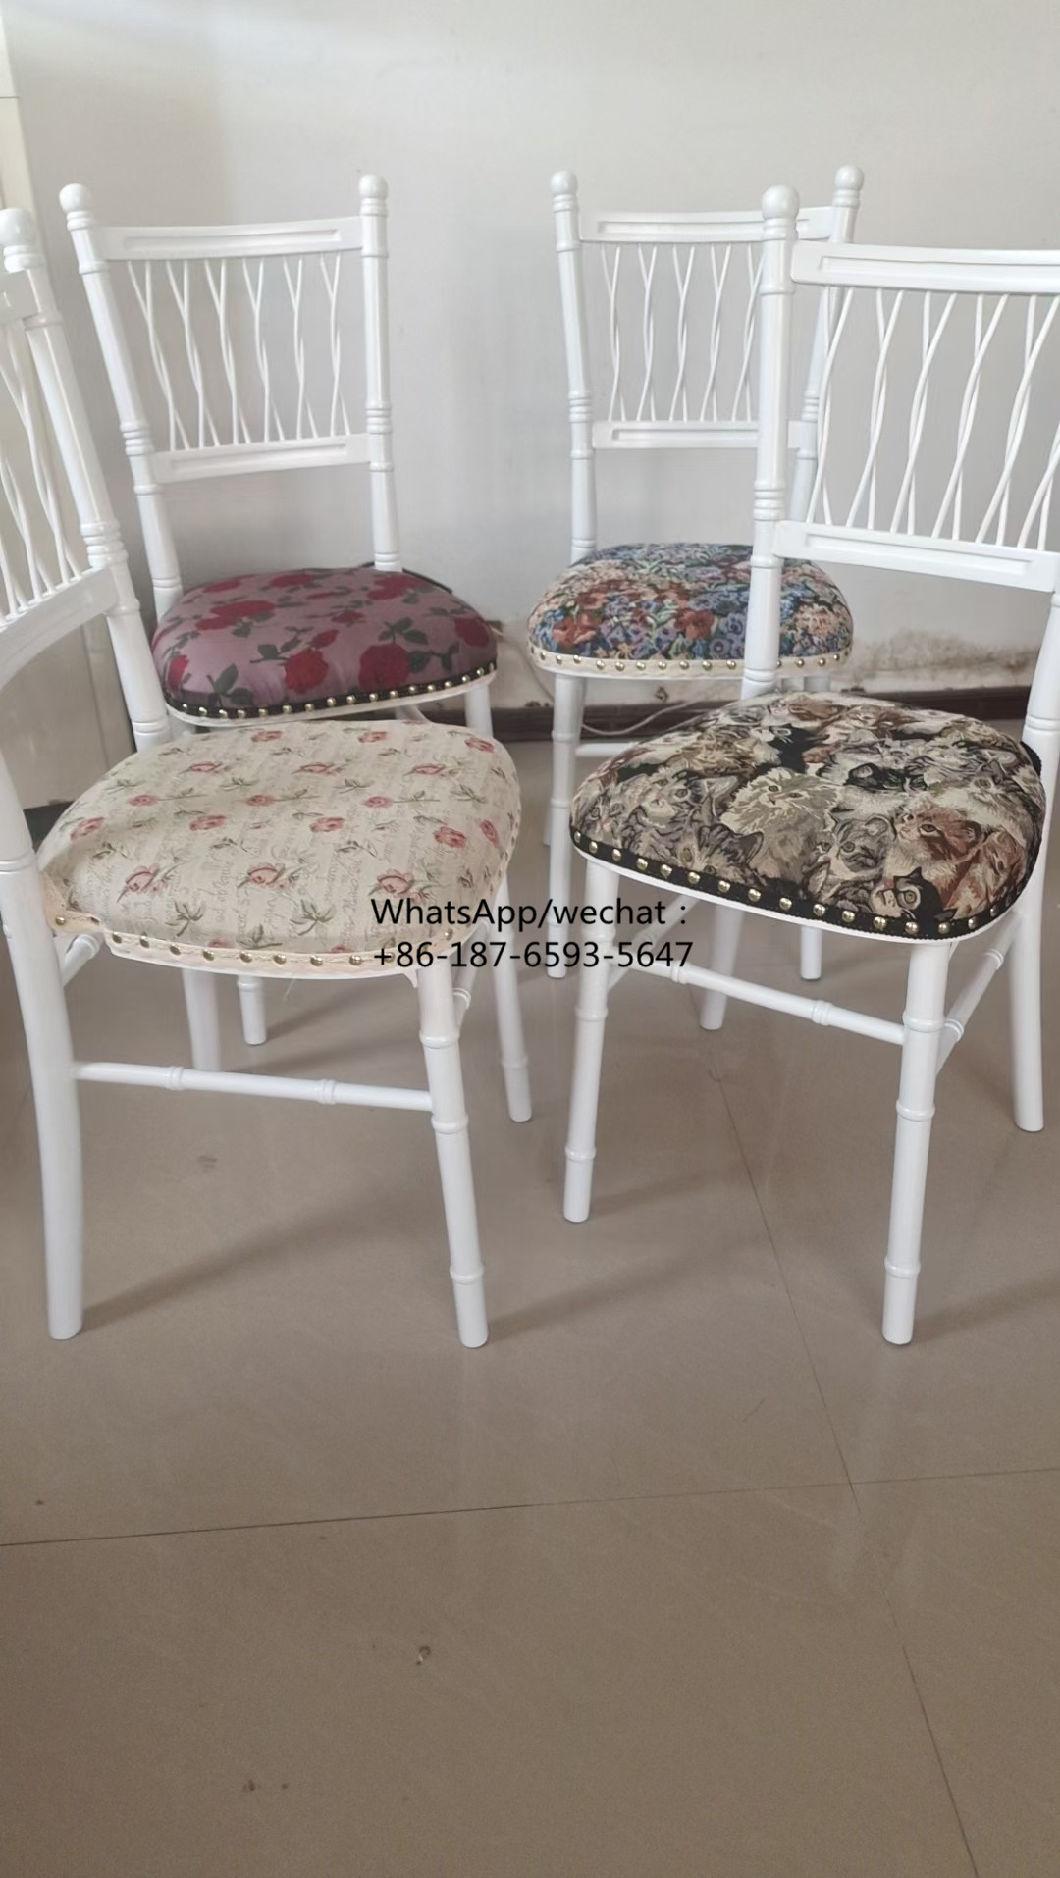 New Arrival Wedding Chair with Revet Cushion